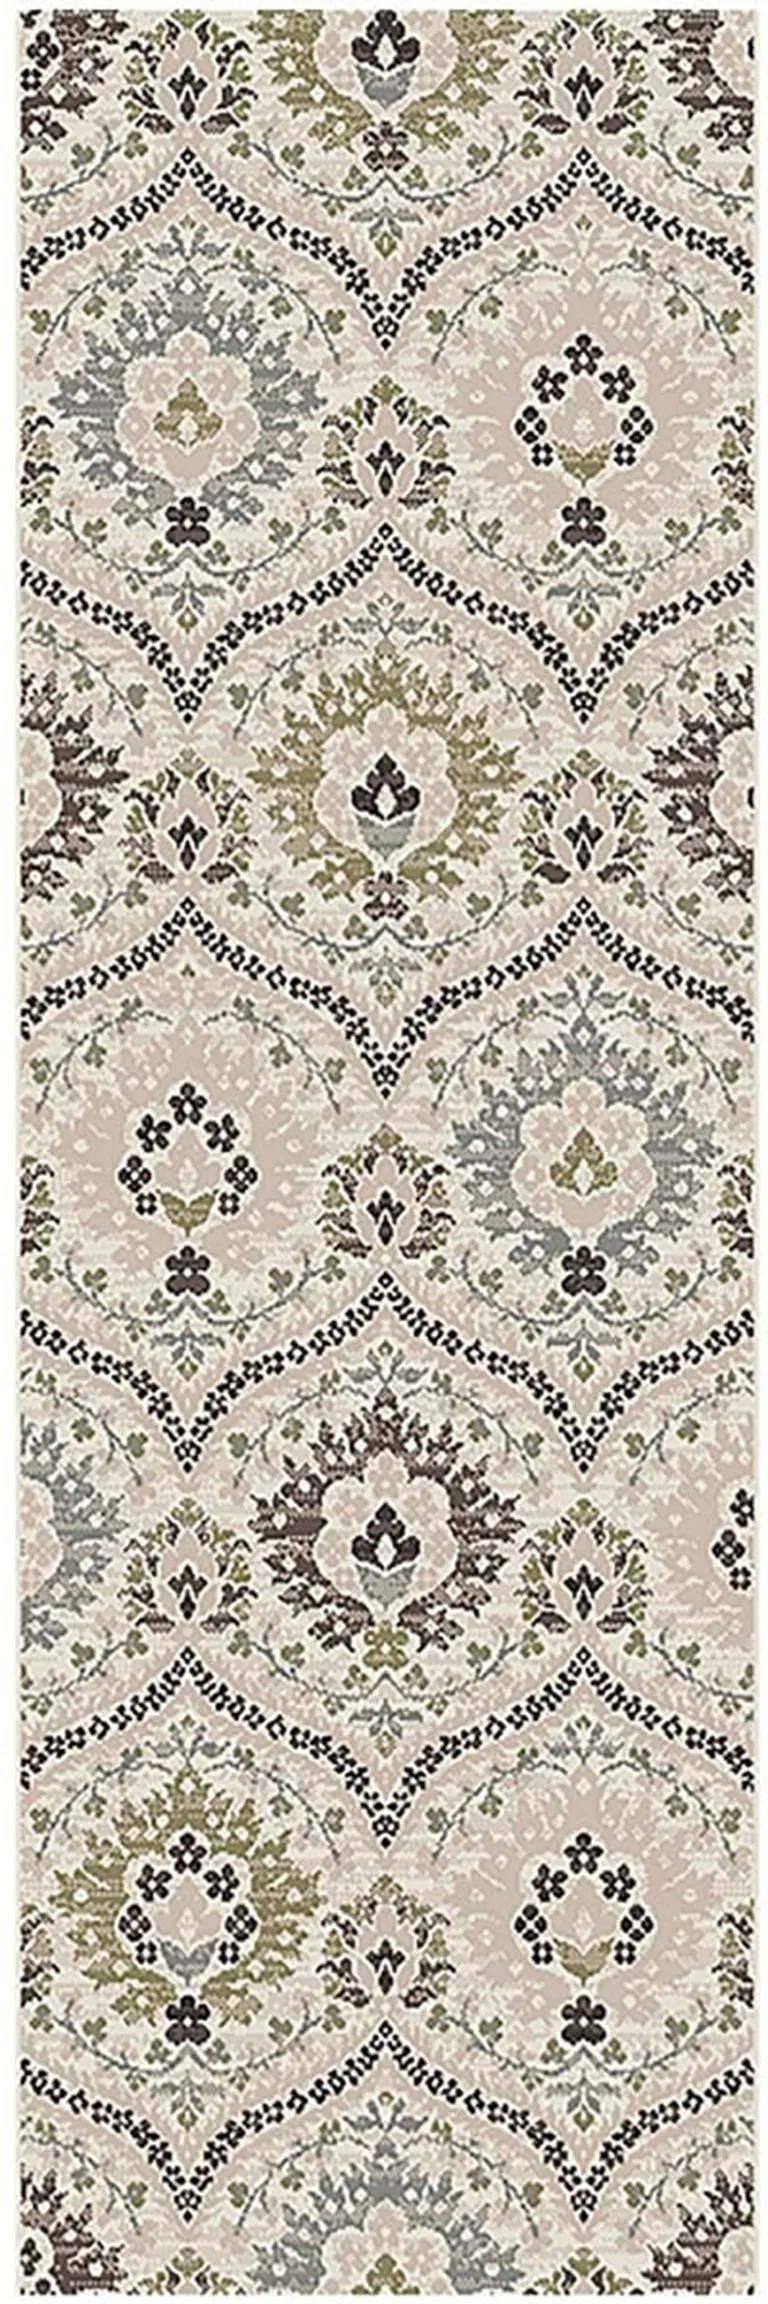 10' Beige Ivory And Brown Floral Stain Resistant Runner Rug Photo 1